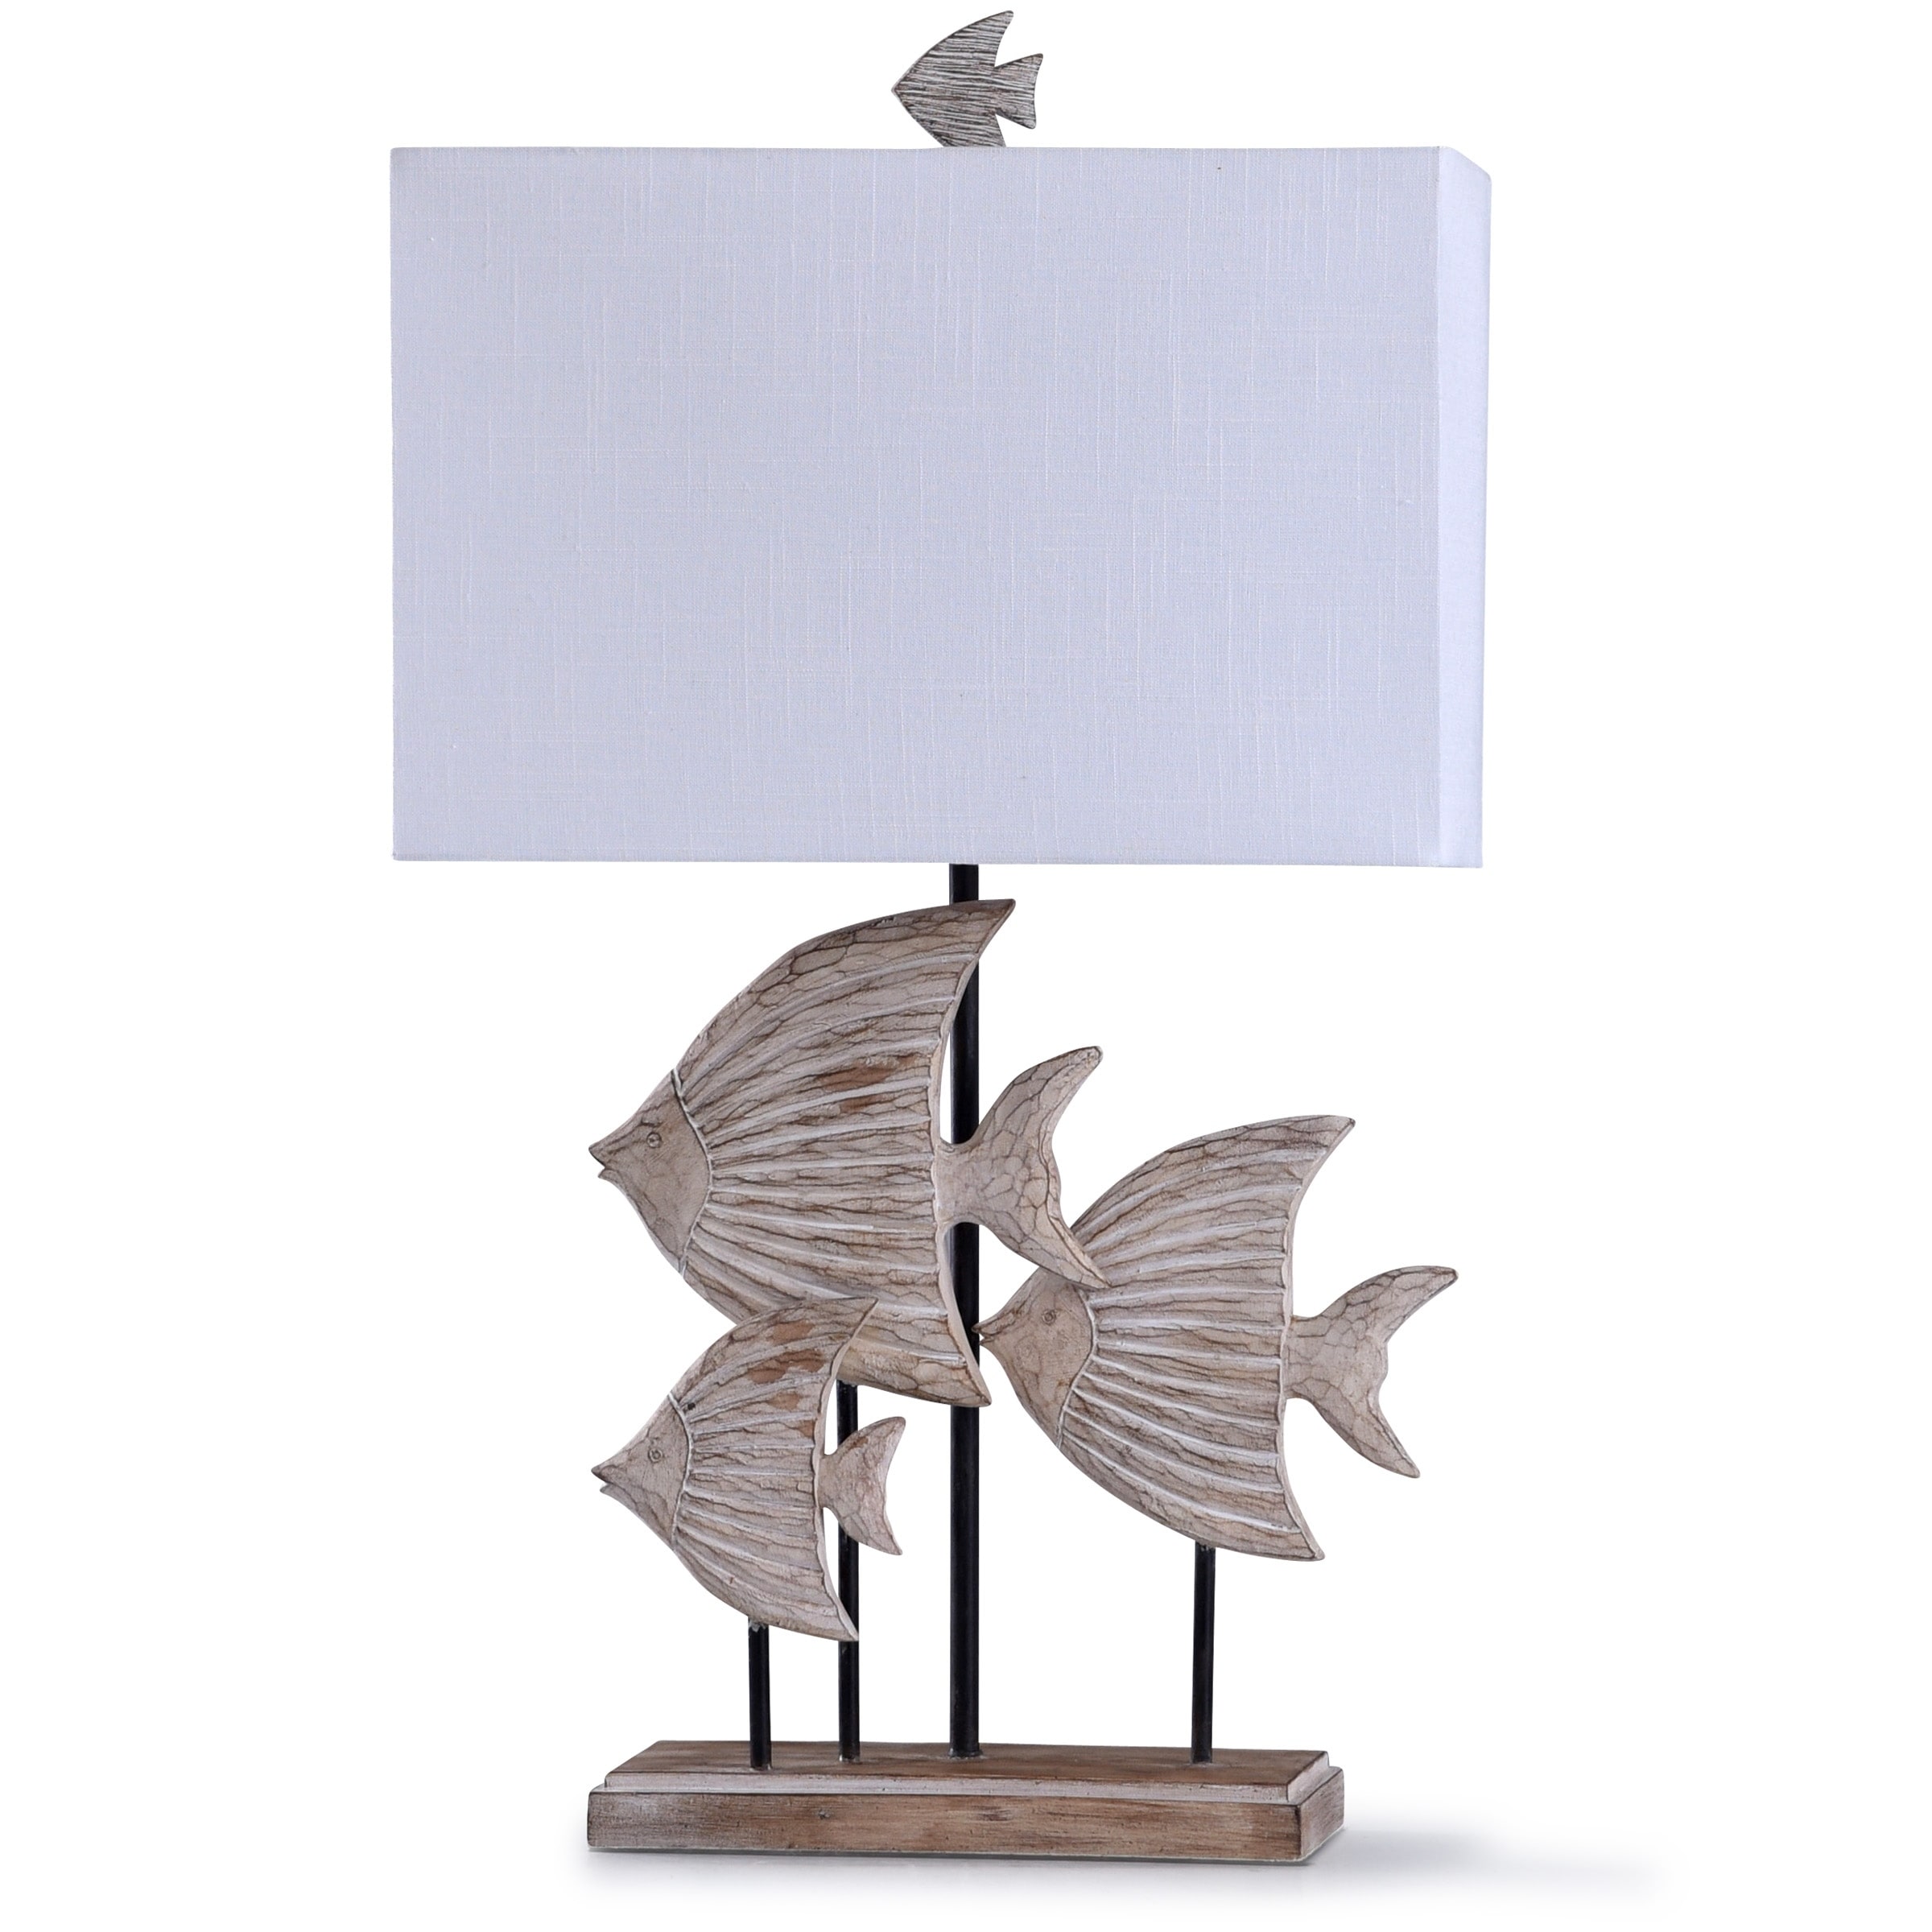 Rona Weathered Beige And Wood Carved Fishes Table Lamp With A White Rectangle Shade